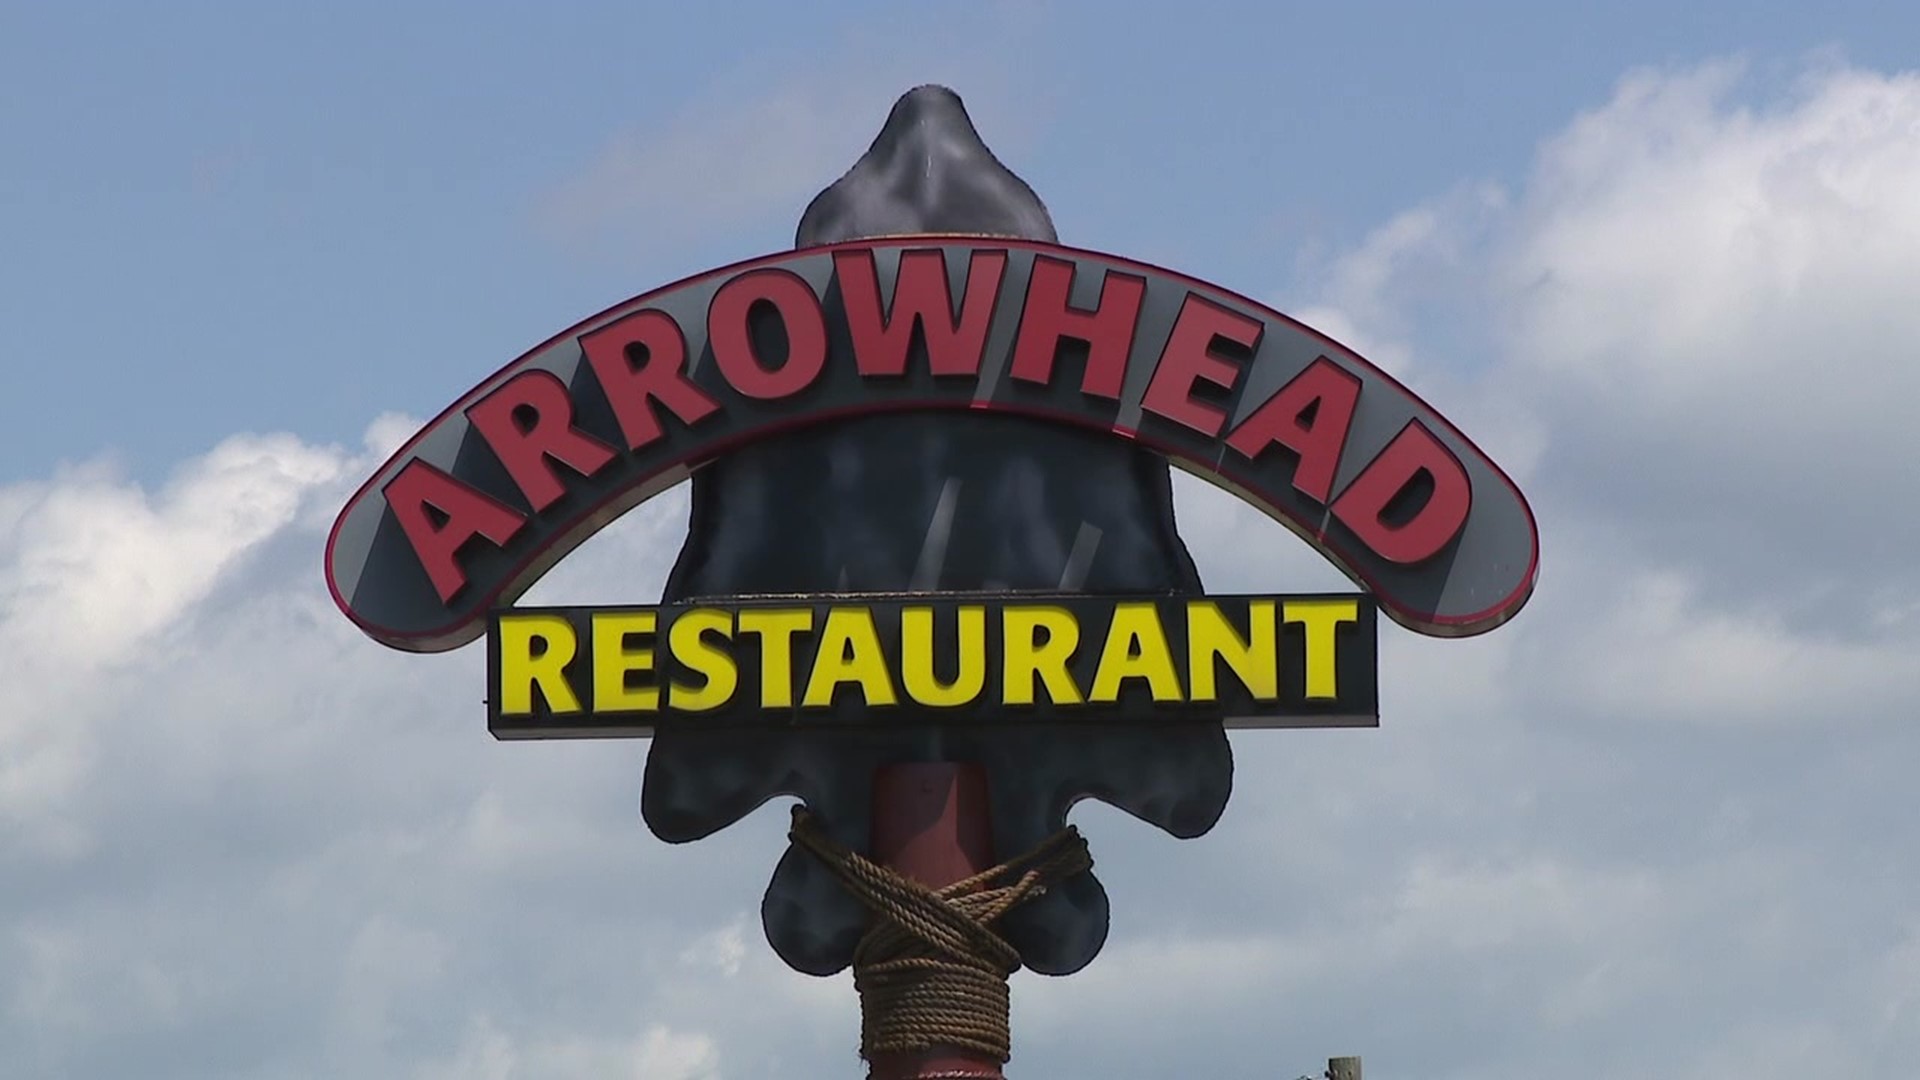 Arrowhead Restaurant will close its doors for the last time next Thursday.